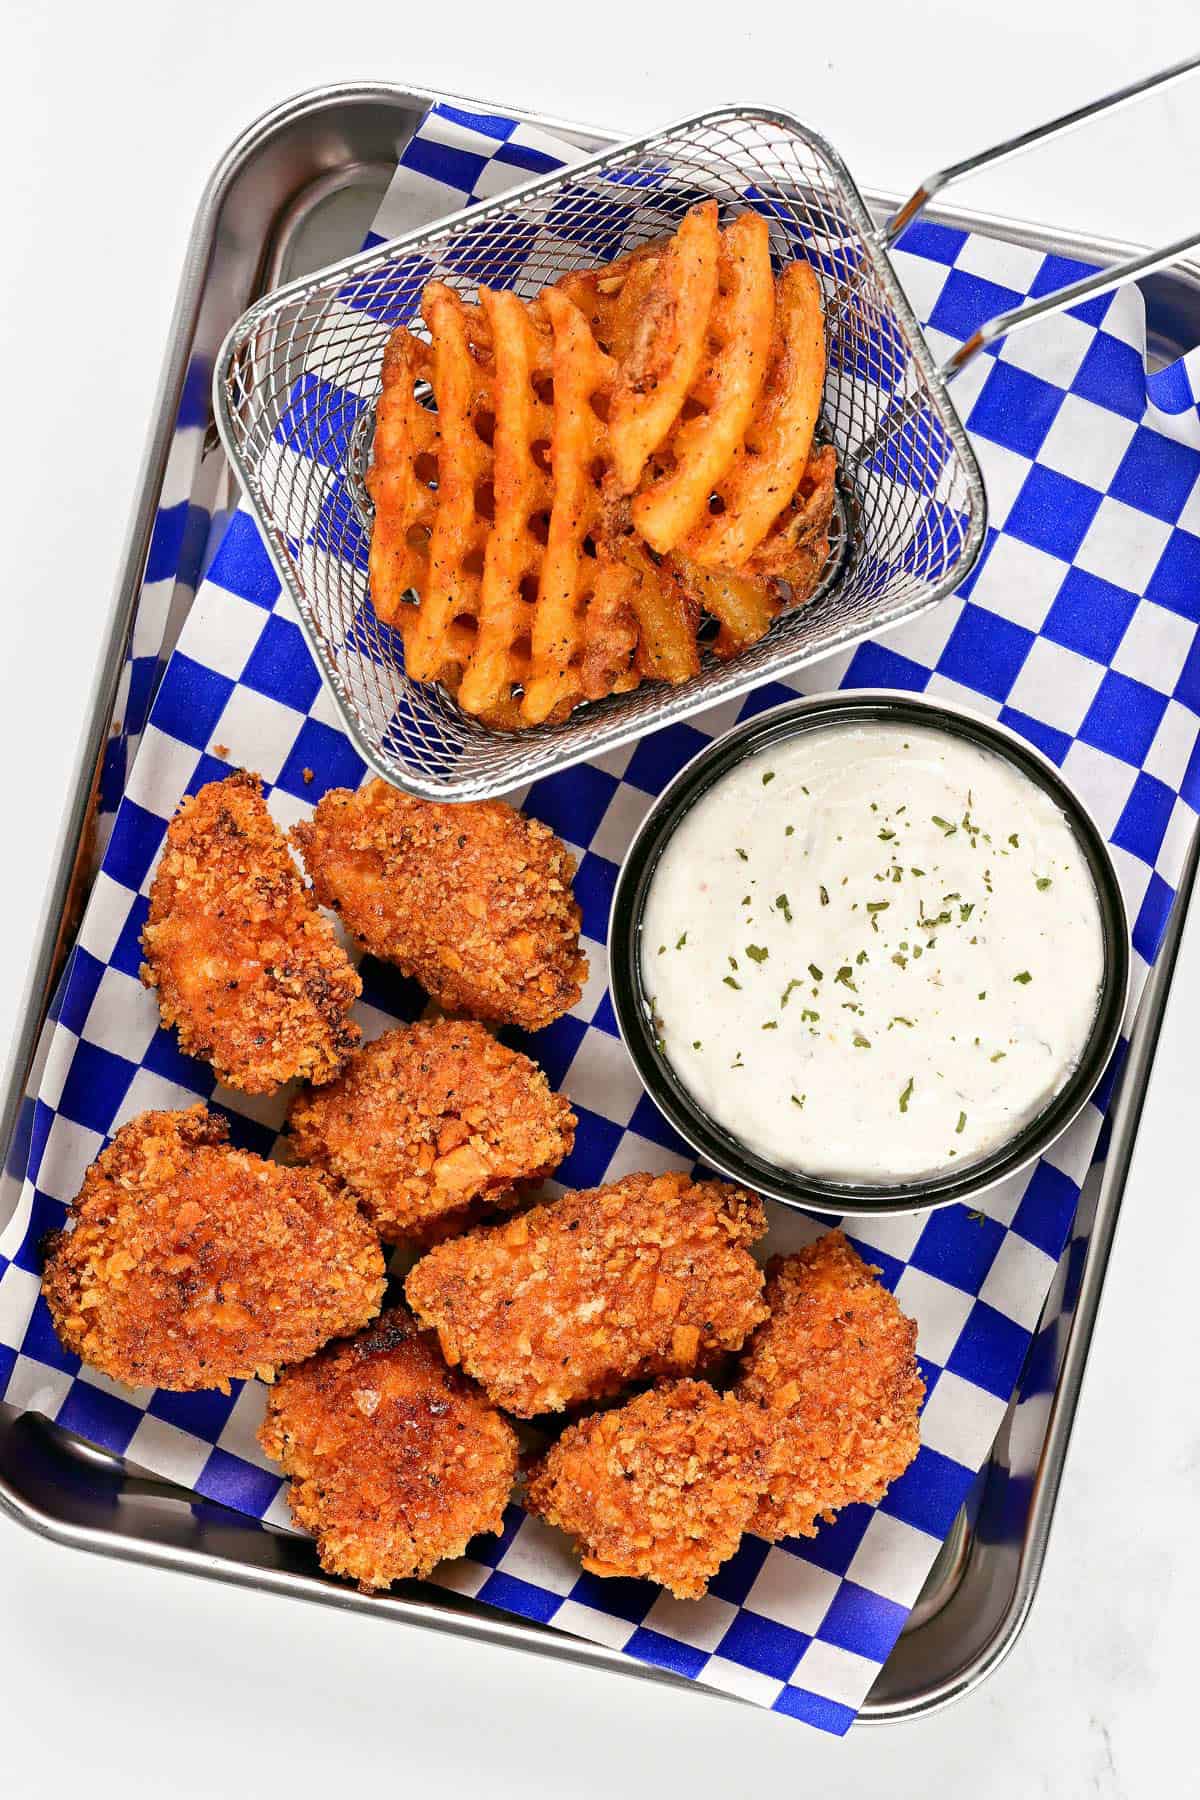 Spicy chicken nuggets, waffle fries, and dip on a checkered lined tray.